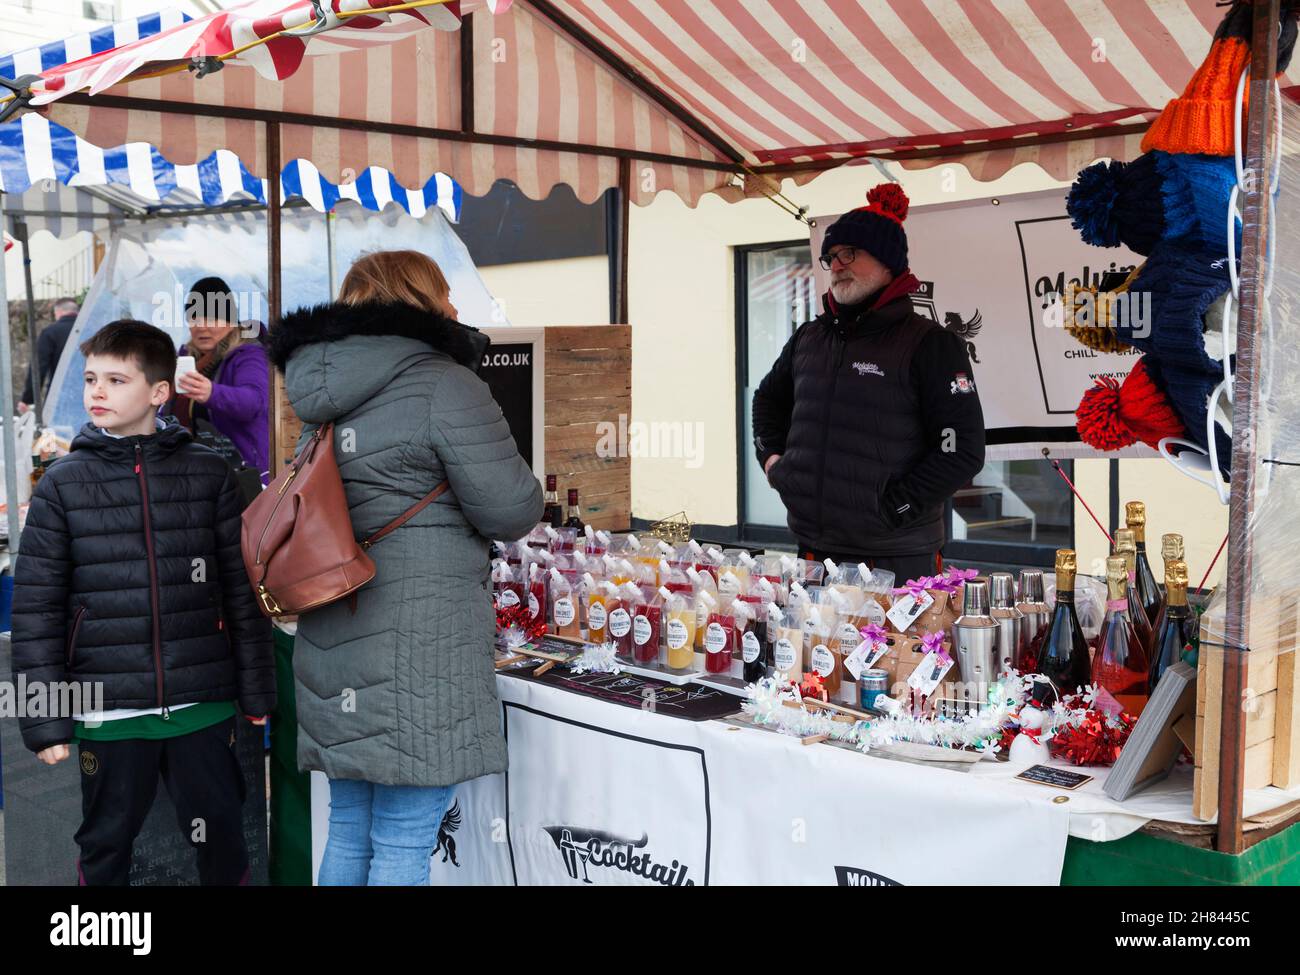 Cocktail stall at Helensburgh Winter Festival, Scotland Stock Photo